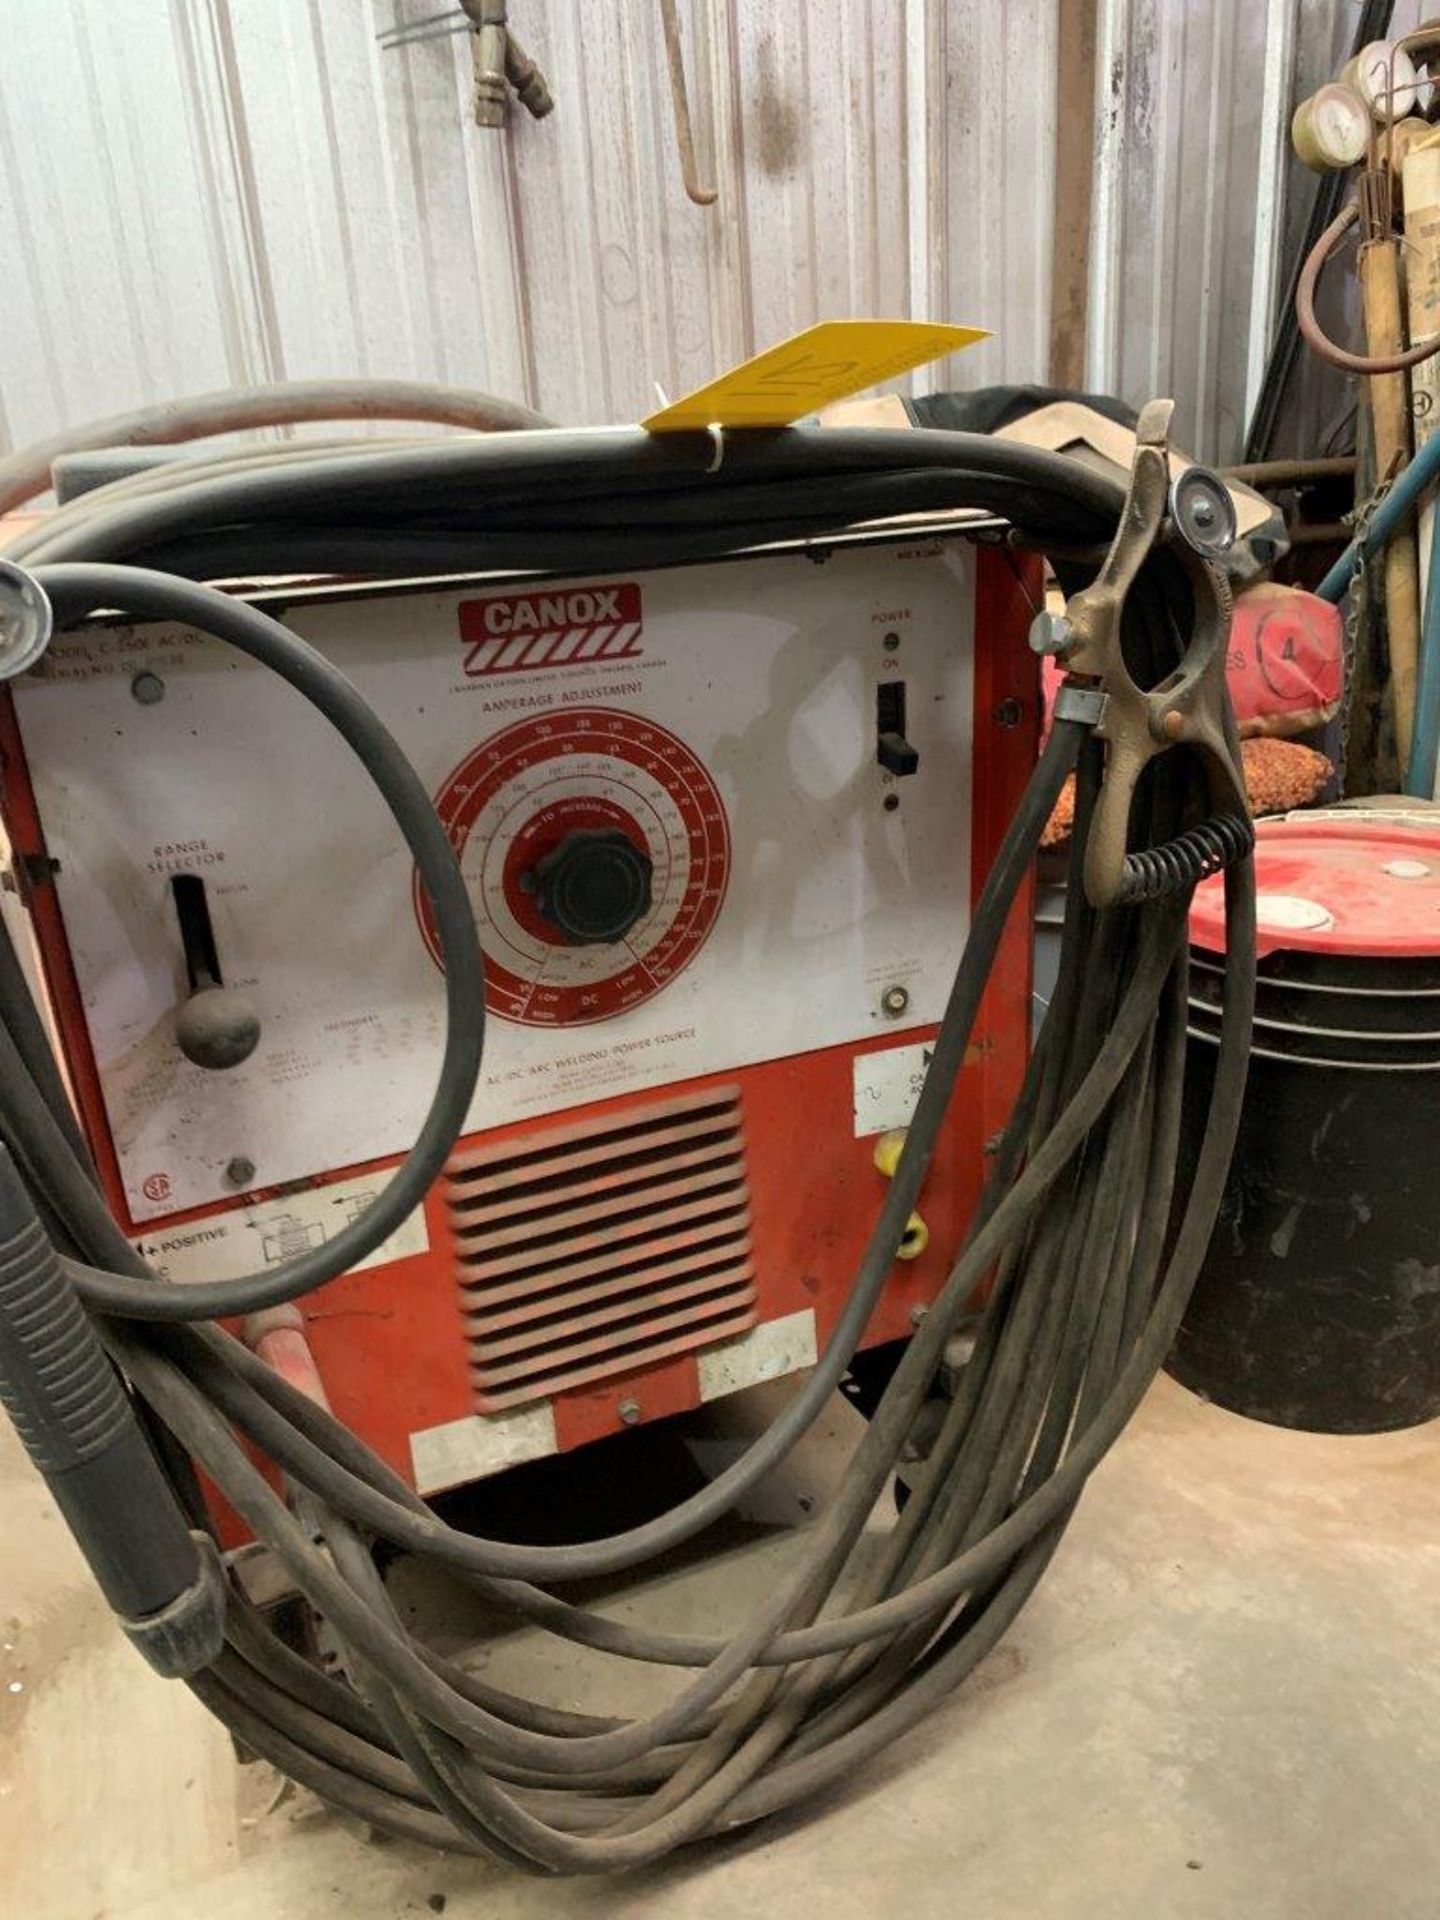 CANOX C250E AC DC ARC WELDING SOURCE 220V W/ CABLES, WHEEL KIT, 6011 ELECTRODES, S/N 93595 - Image 3 of 4